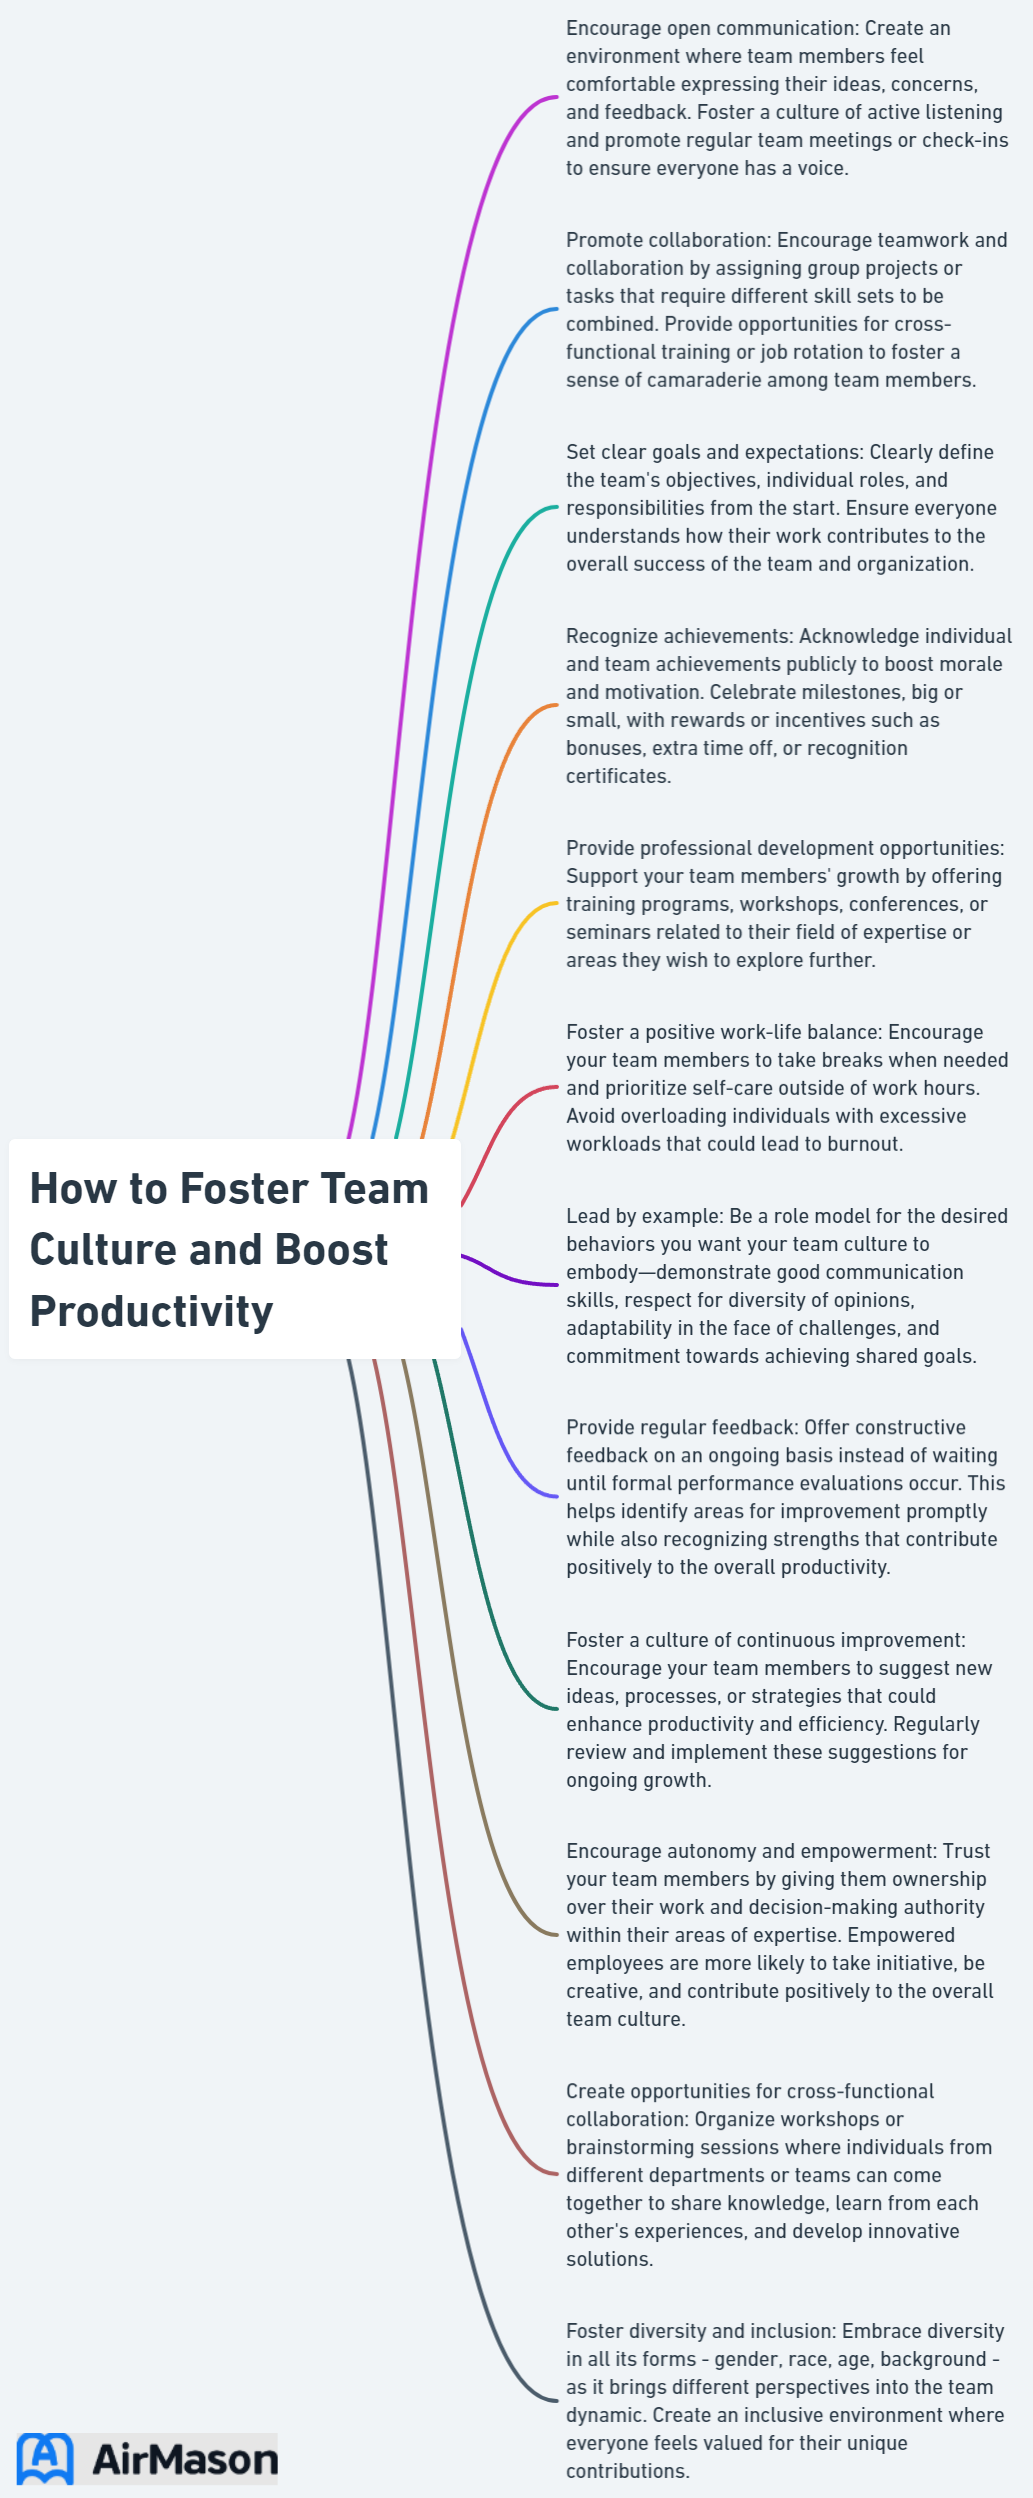 How to Foster Team Culture and Boost Productivity